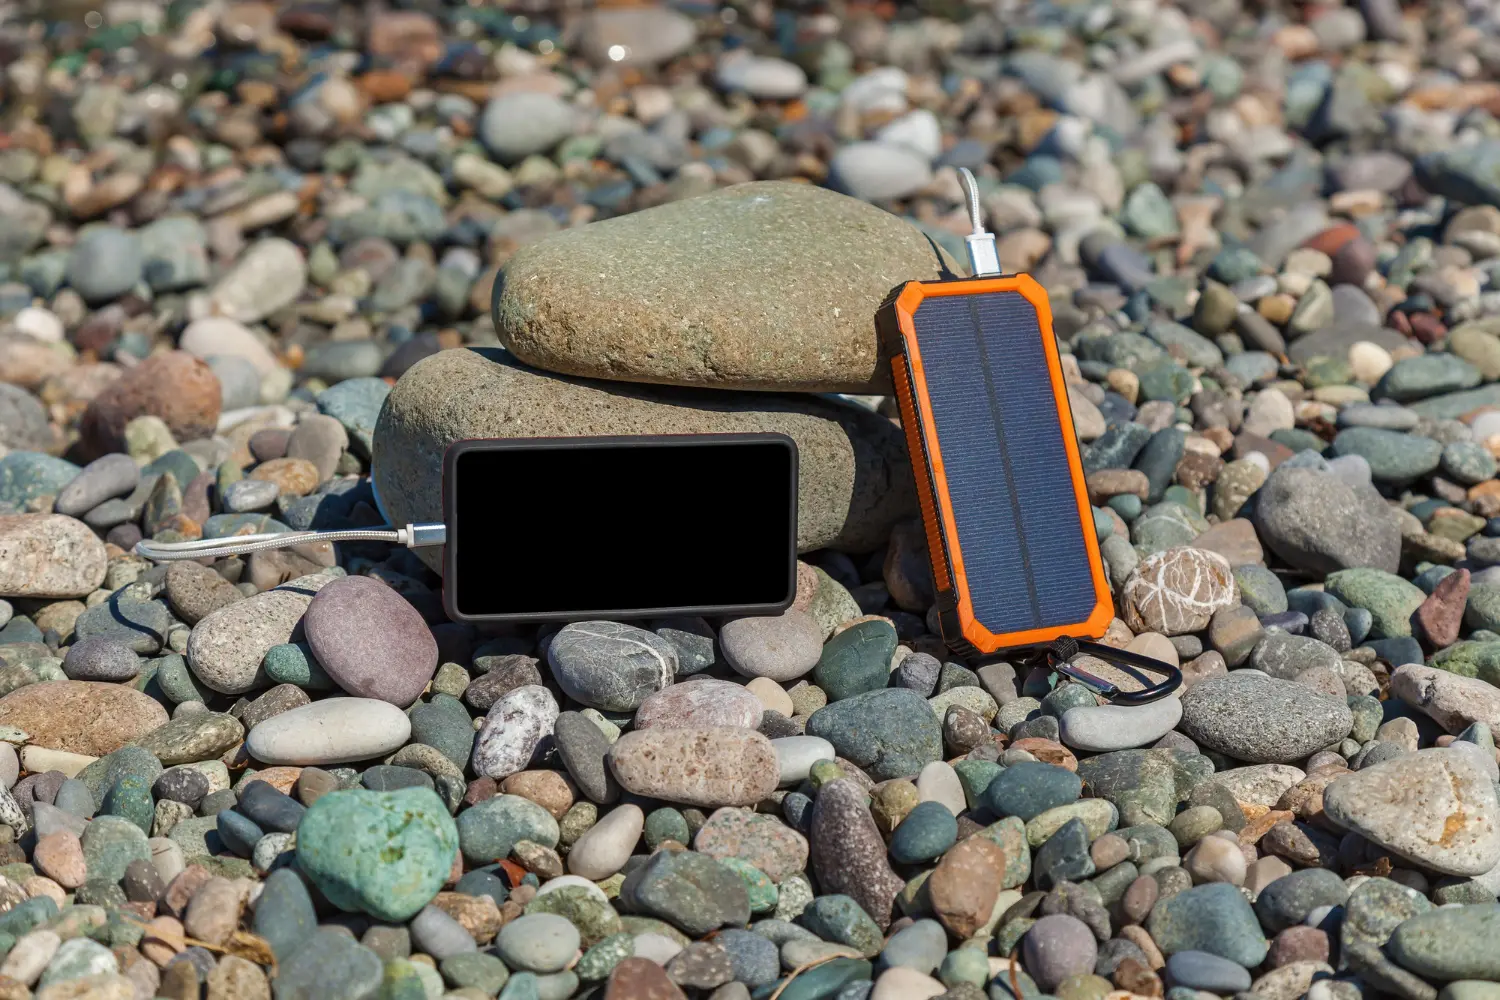 Stay Powered Up With Jackery’s Portable Power Solutions